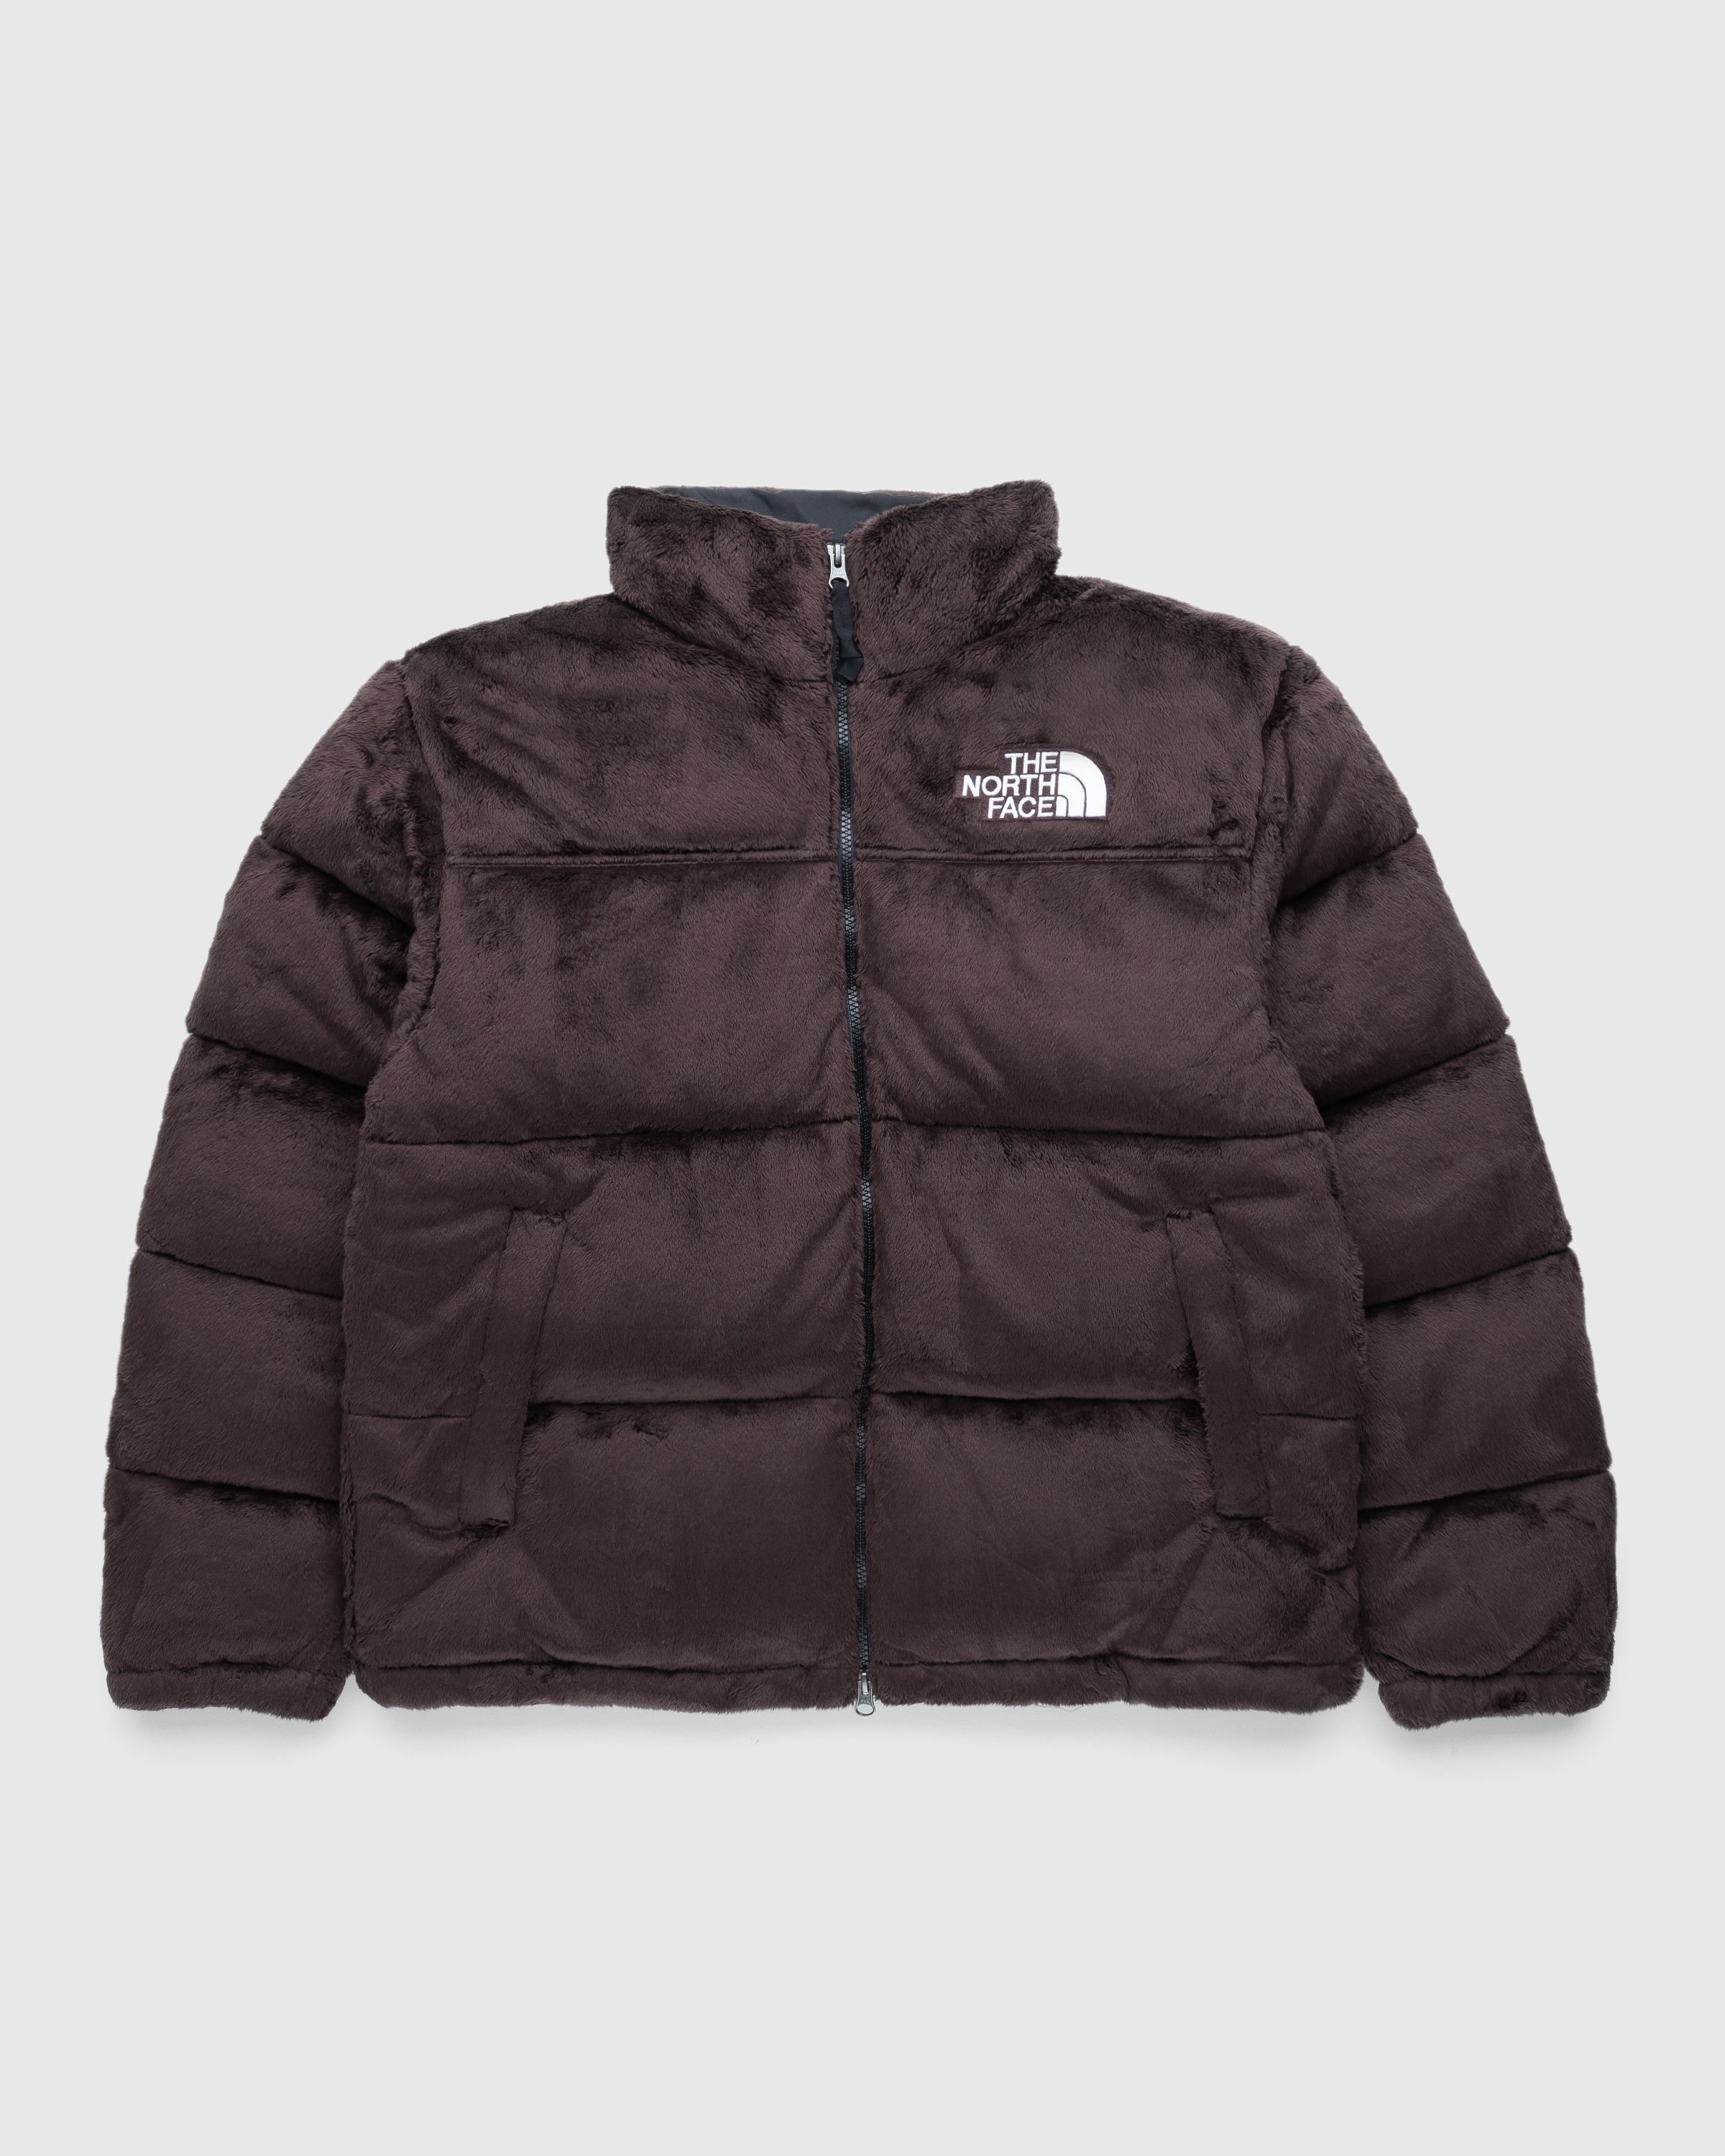 The North Face - Versa Velour Nuptse Jacket Brown - Clothing - Brown - Image 1